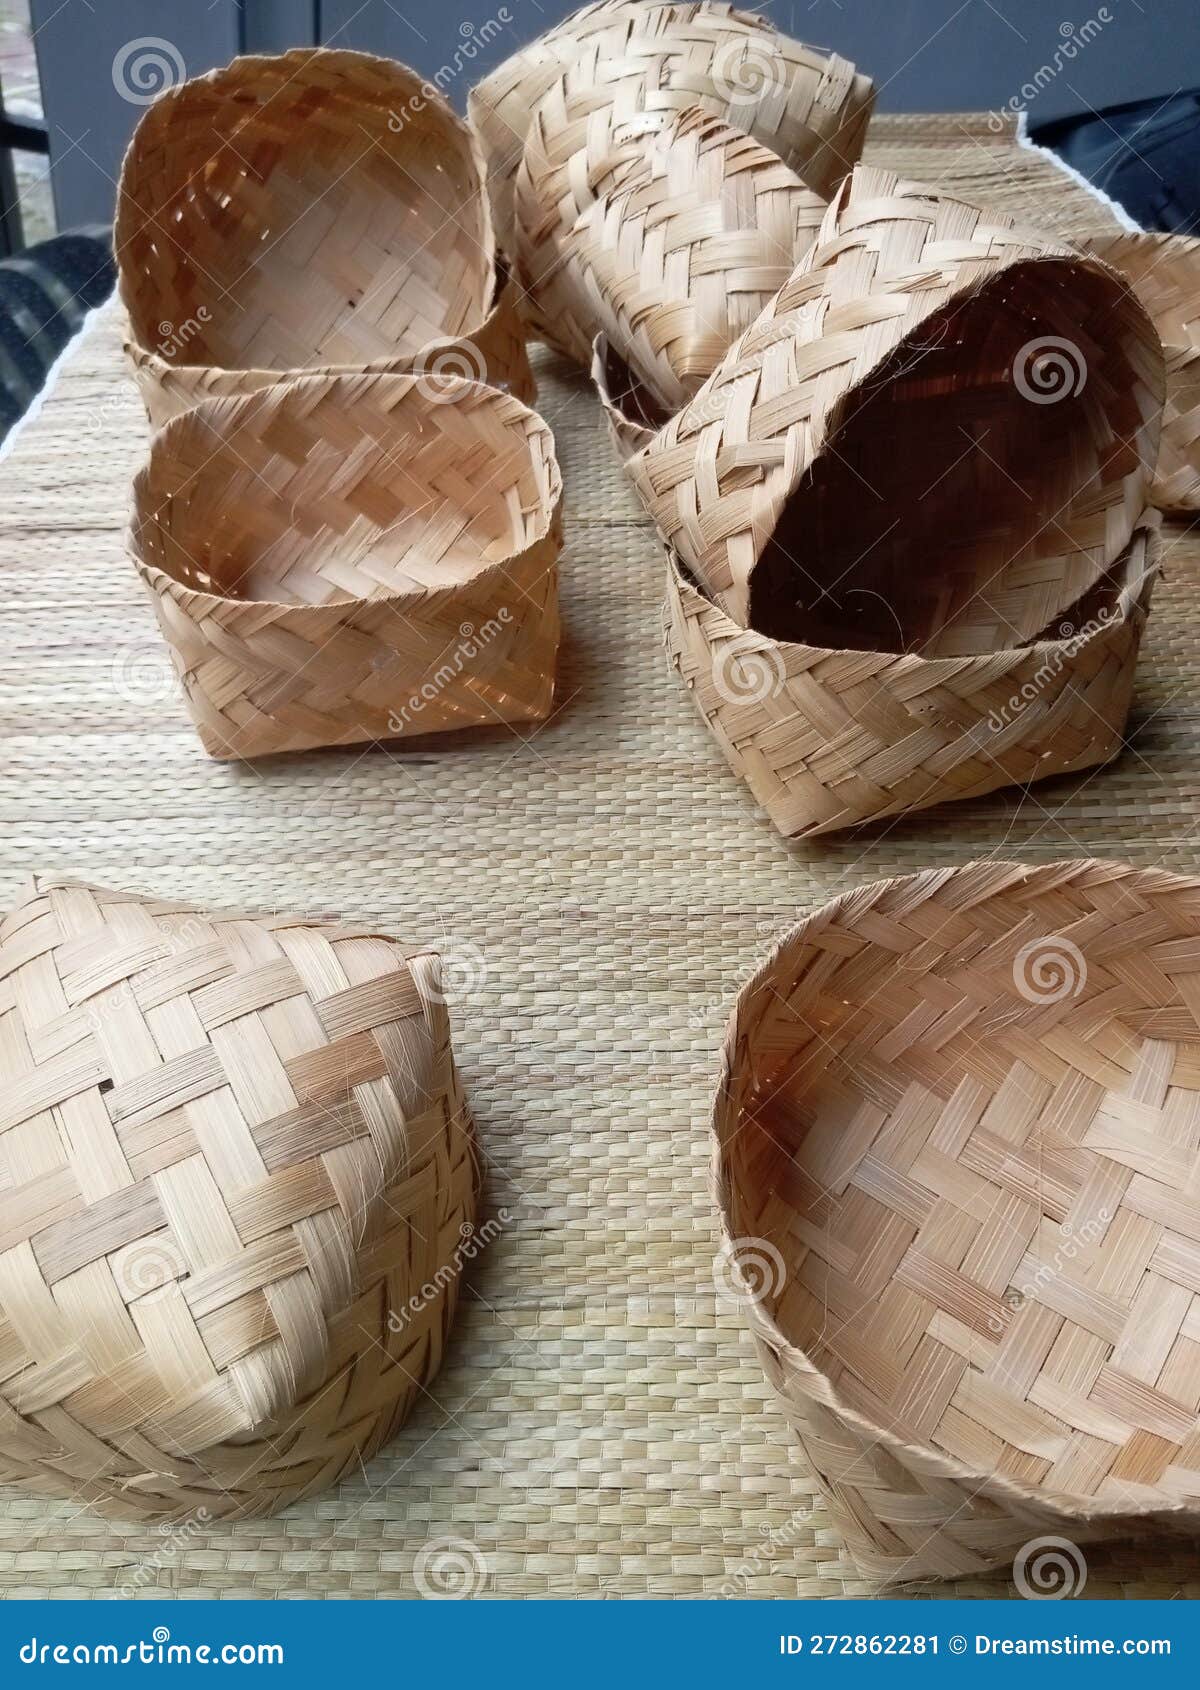 besek tradisional bamboo container